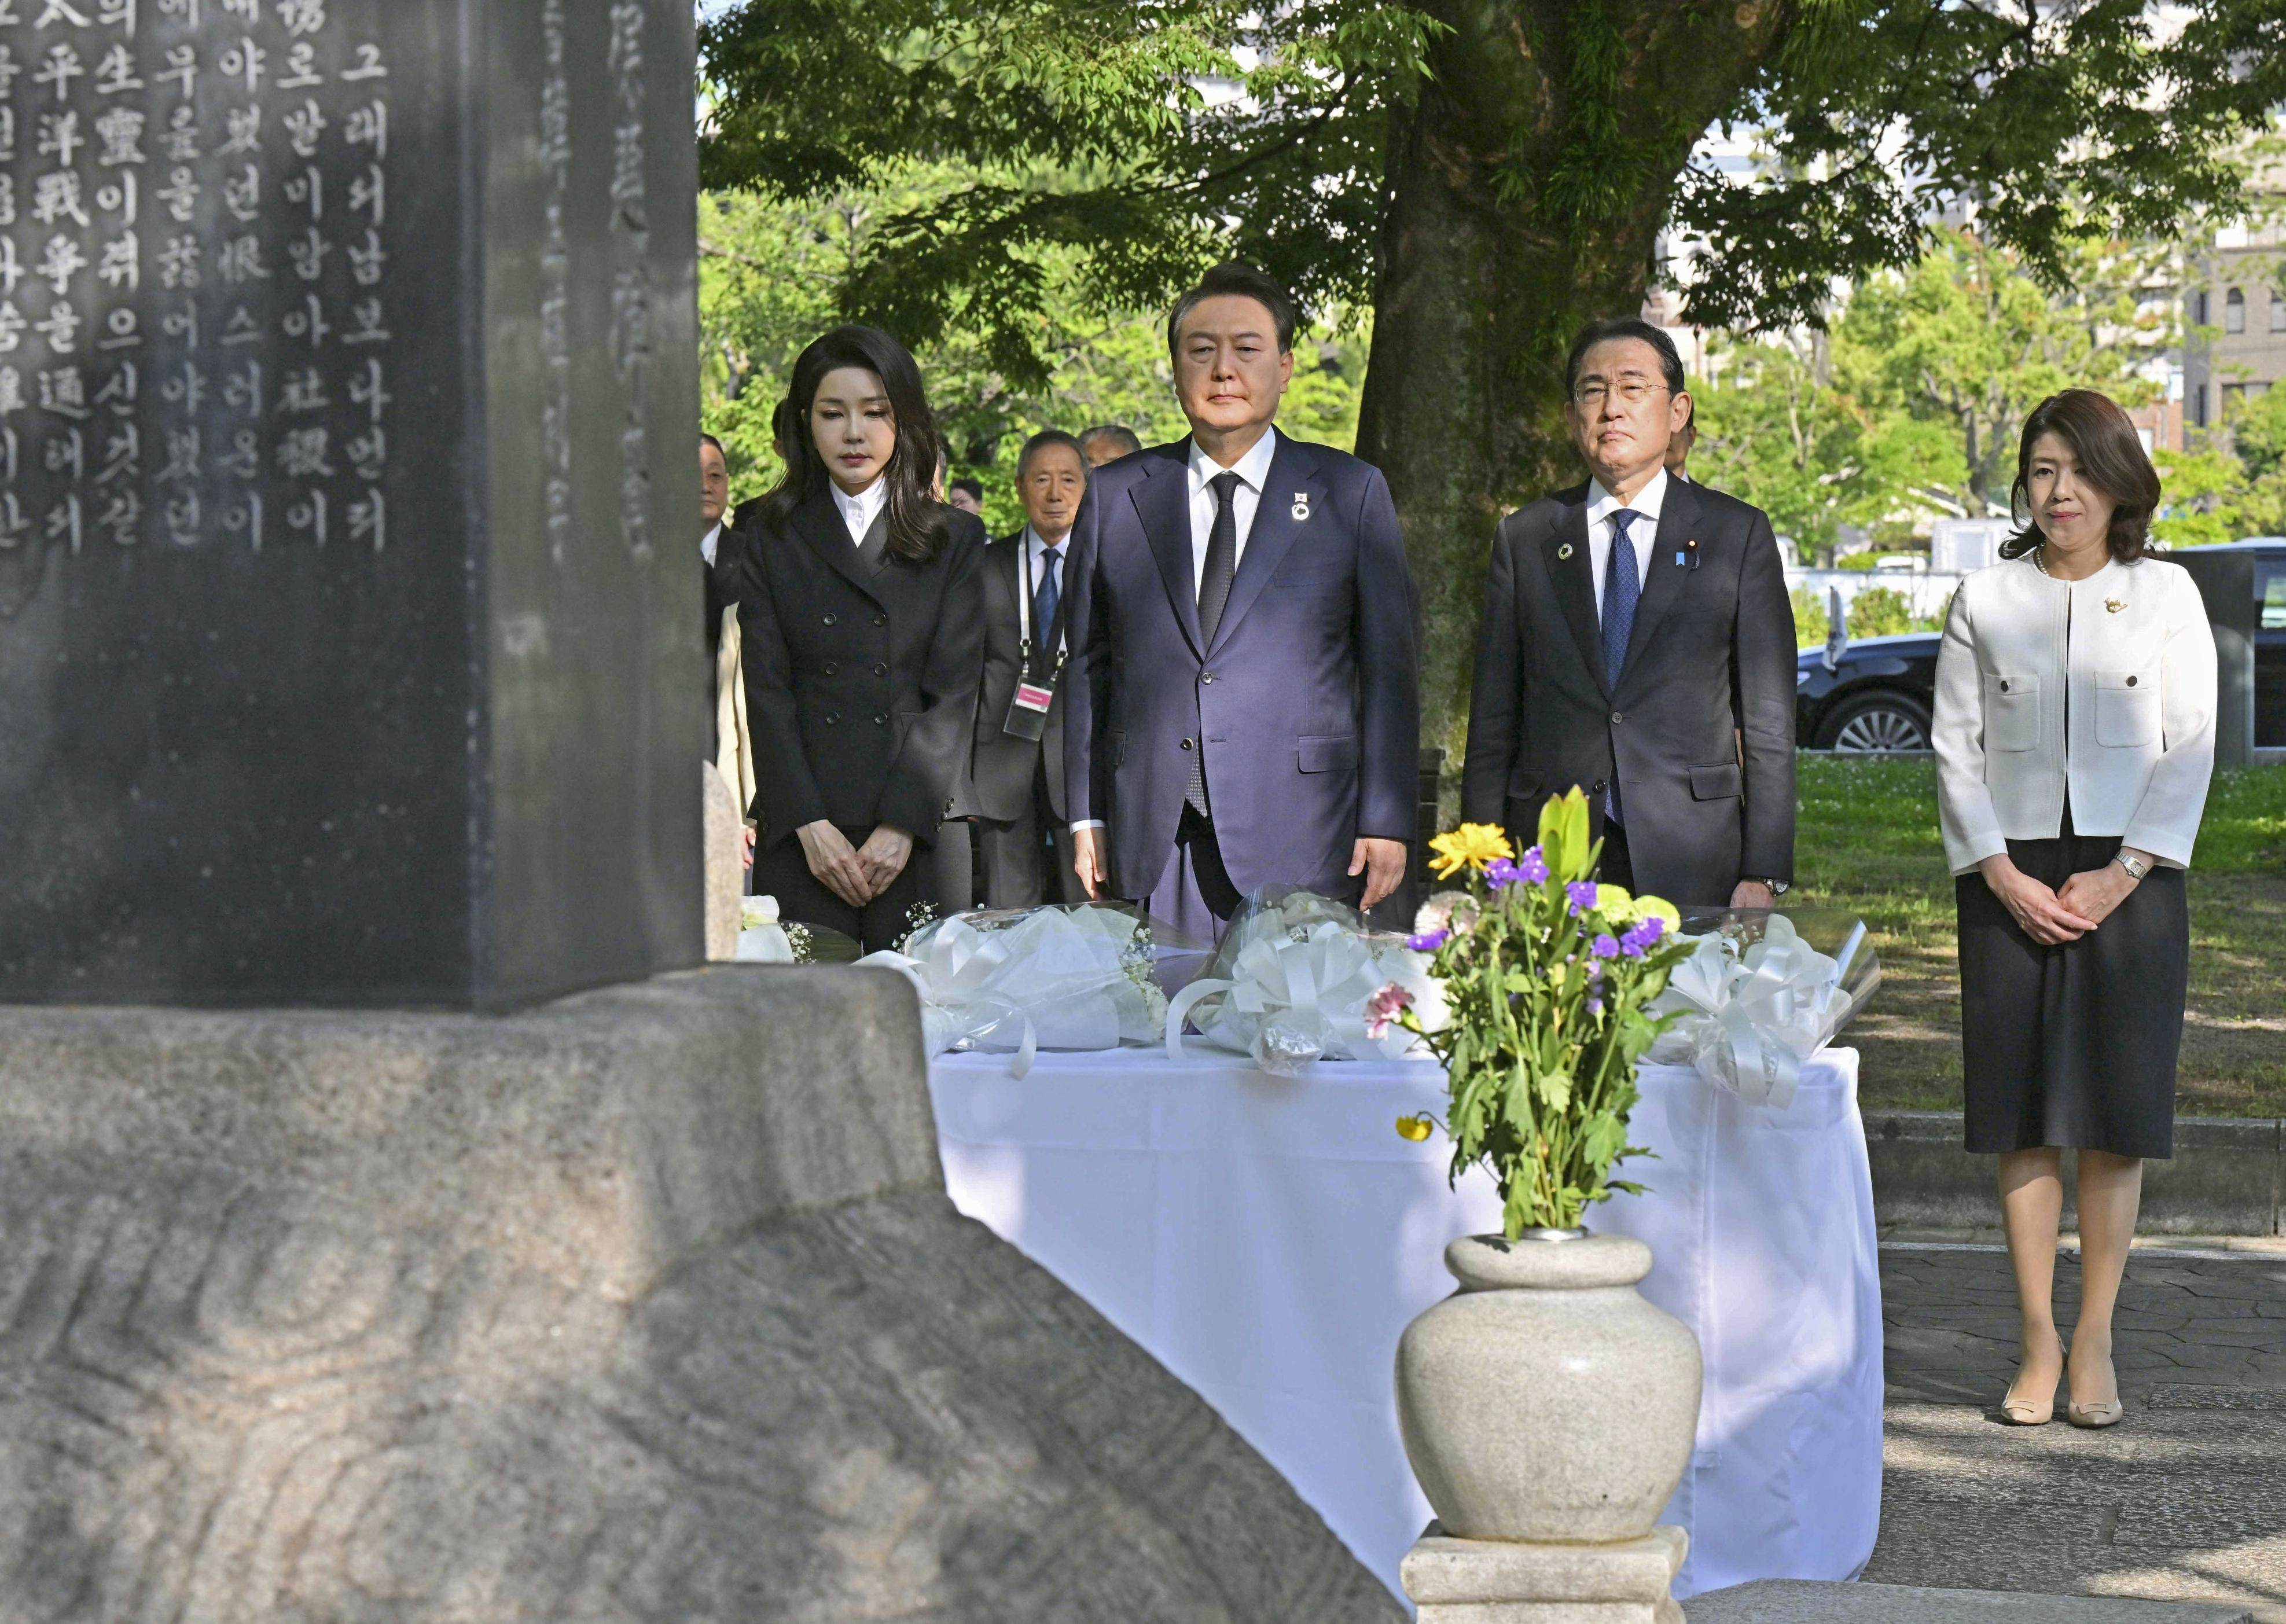 Japanese Prime Minister Fumio Kishida (second from right), South Korean President Yoon Suk-yeol (second from left) and their wives offer flowers to the cenotaph for Korean victims of the 1945 US atomic bombing of Hiroshima in the Peace Memorial Park on Sunday. Photo: Kyodo